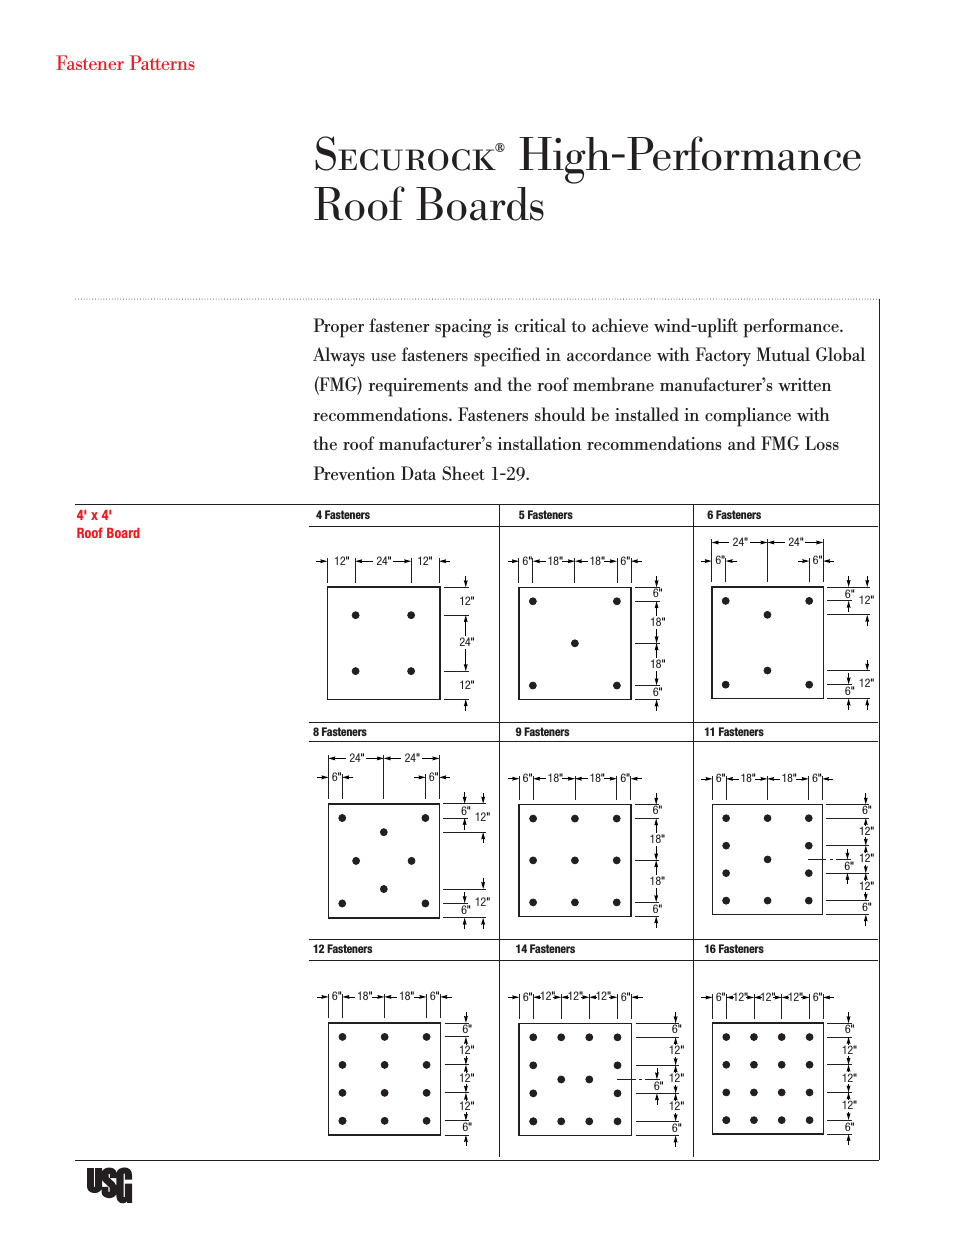 Securock High-Performance Roof Boards